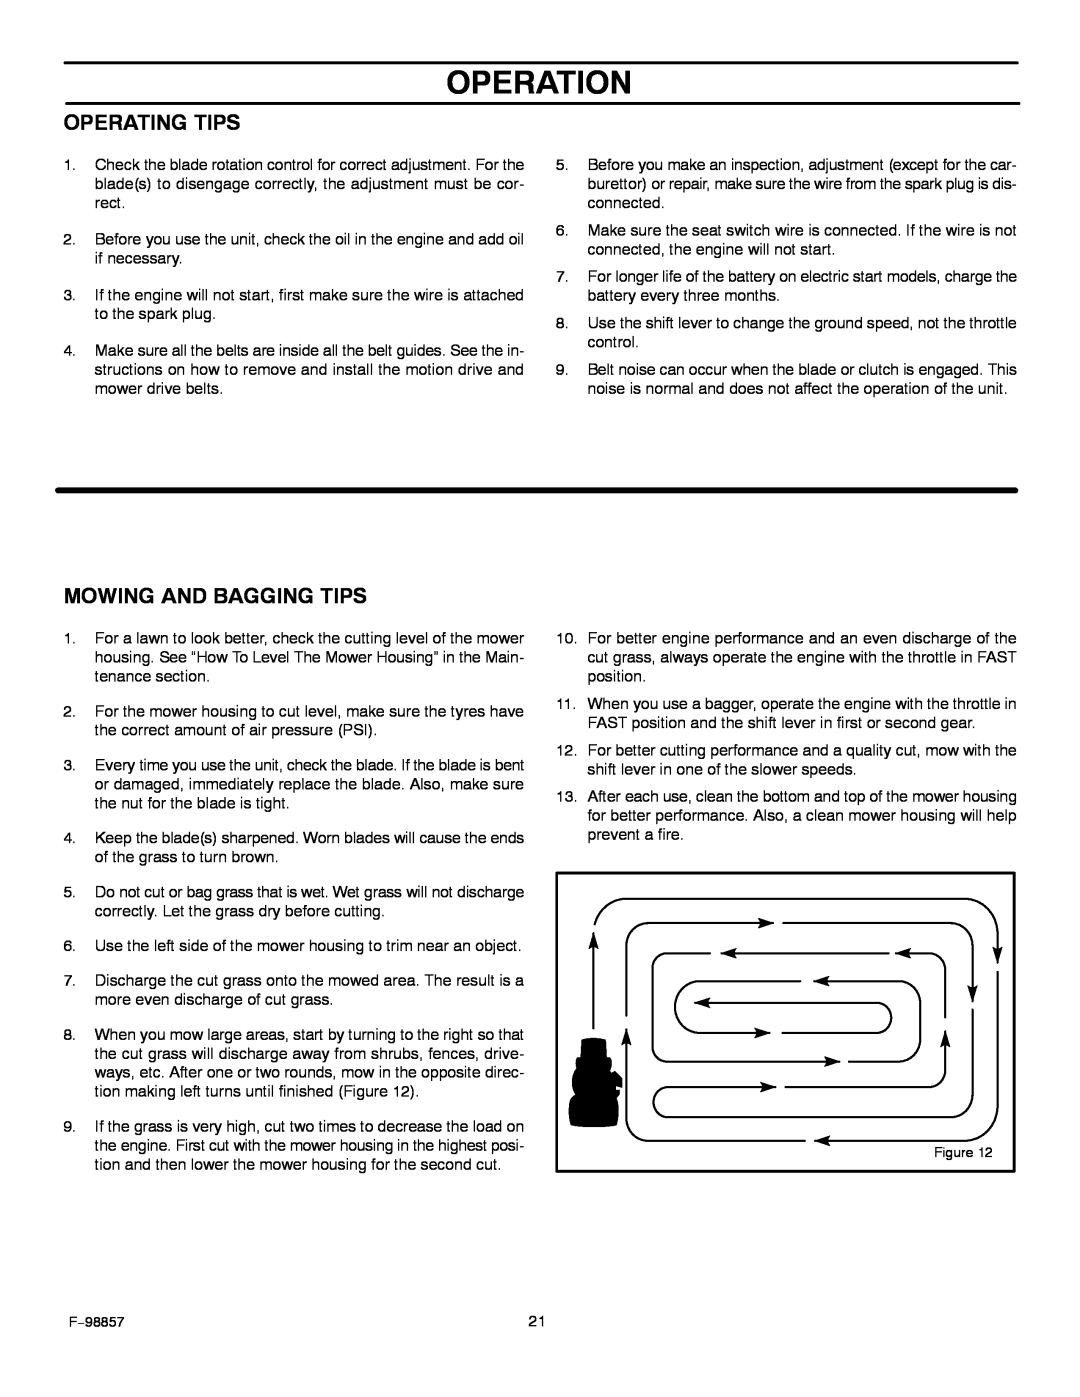 Hayter Mowers 30-Dec manual Operating Tips, Mowing And Bagging Tips, Operation 